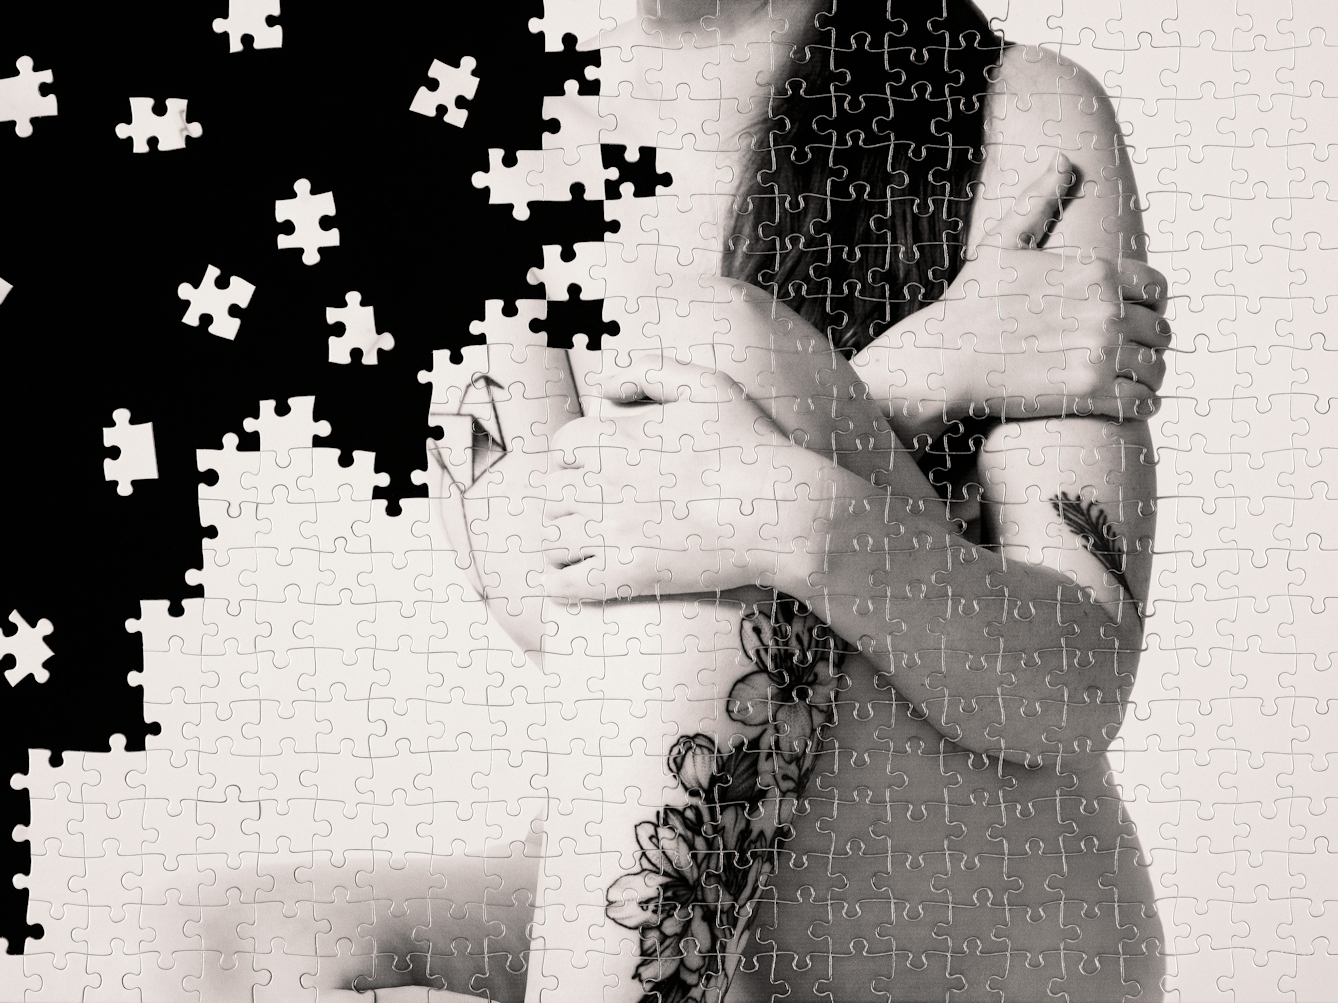 Photograph of a part made jigsaw puzzle containing hundreds of pieces. The jigsaw has been photographed against a black background, with many of the unused pieces scattered around in the black space. The image on the jigsaw is a warmed toned, monotone photograph of a nude woman against a plain light background. The woman is seated on the floor, pictured from the thigh to the neck. On her arm and leg are floral tattoos. The missing jigsaw pieces create a black void which encroaches from the left side of the image, fragmenting the image of the woman.